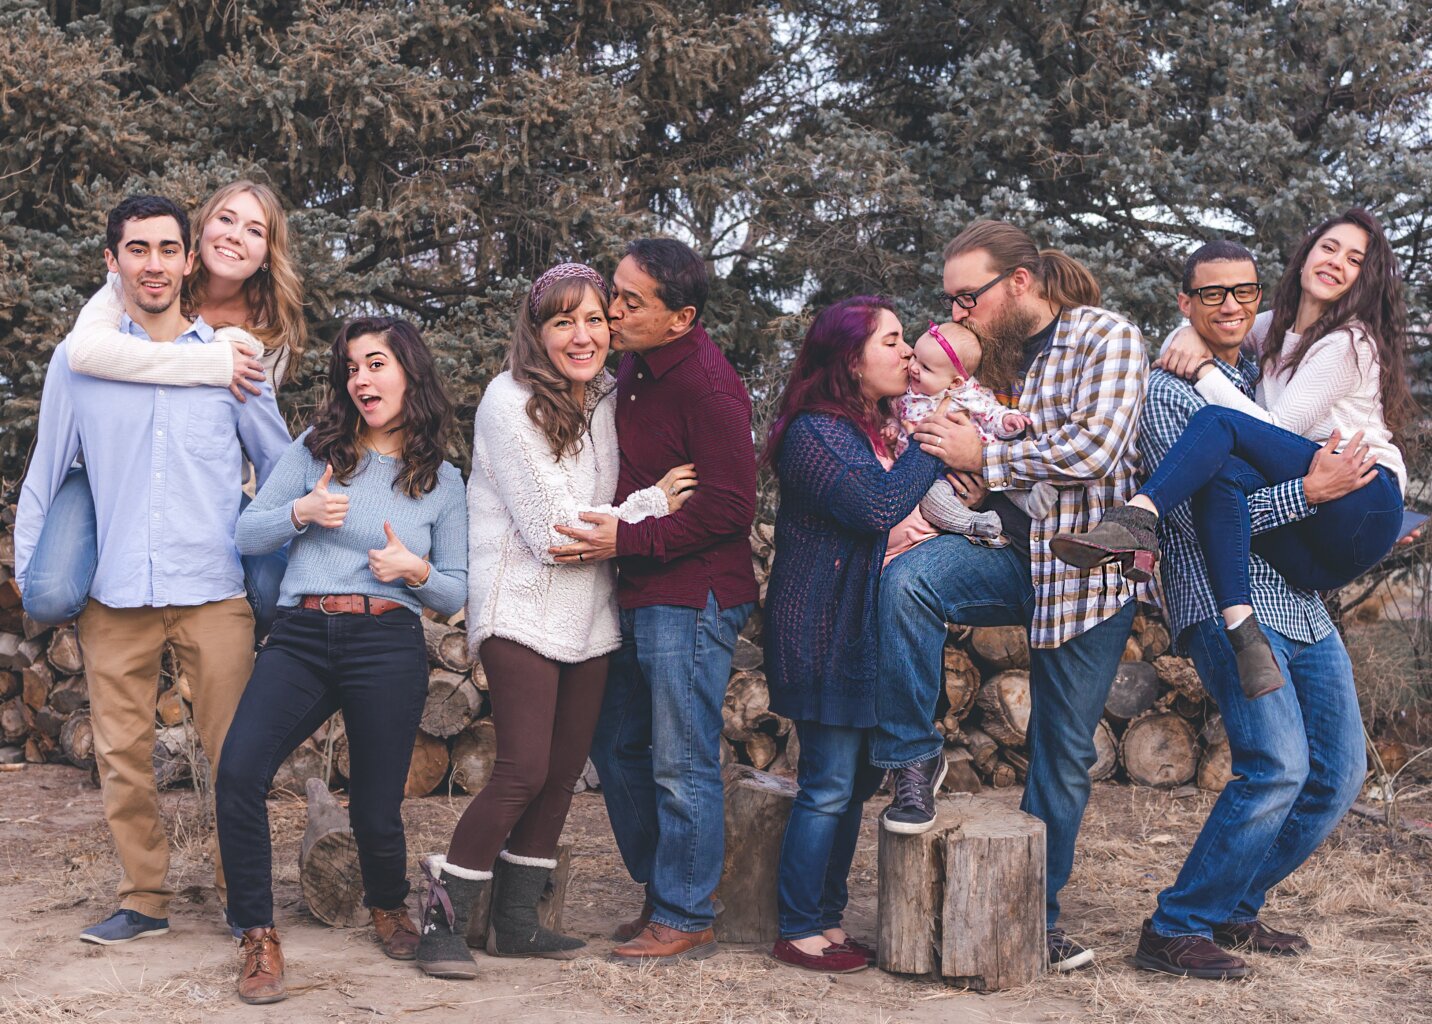 A family of ten, including four man and woman couples, a single woman, and a baby, taking a photo together.